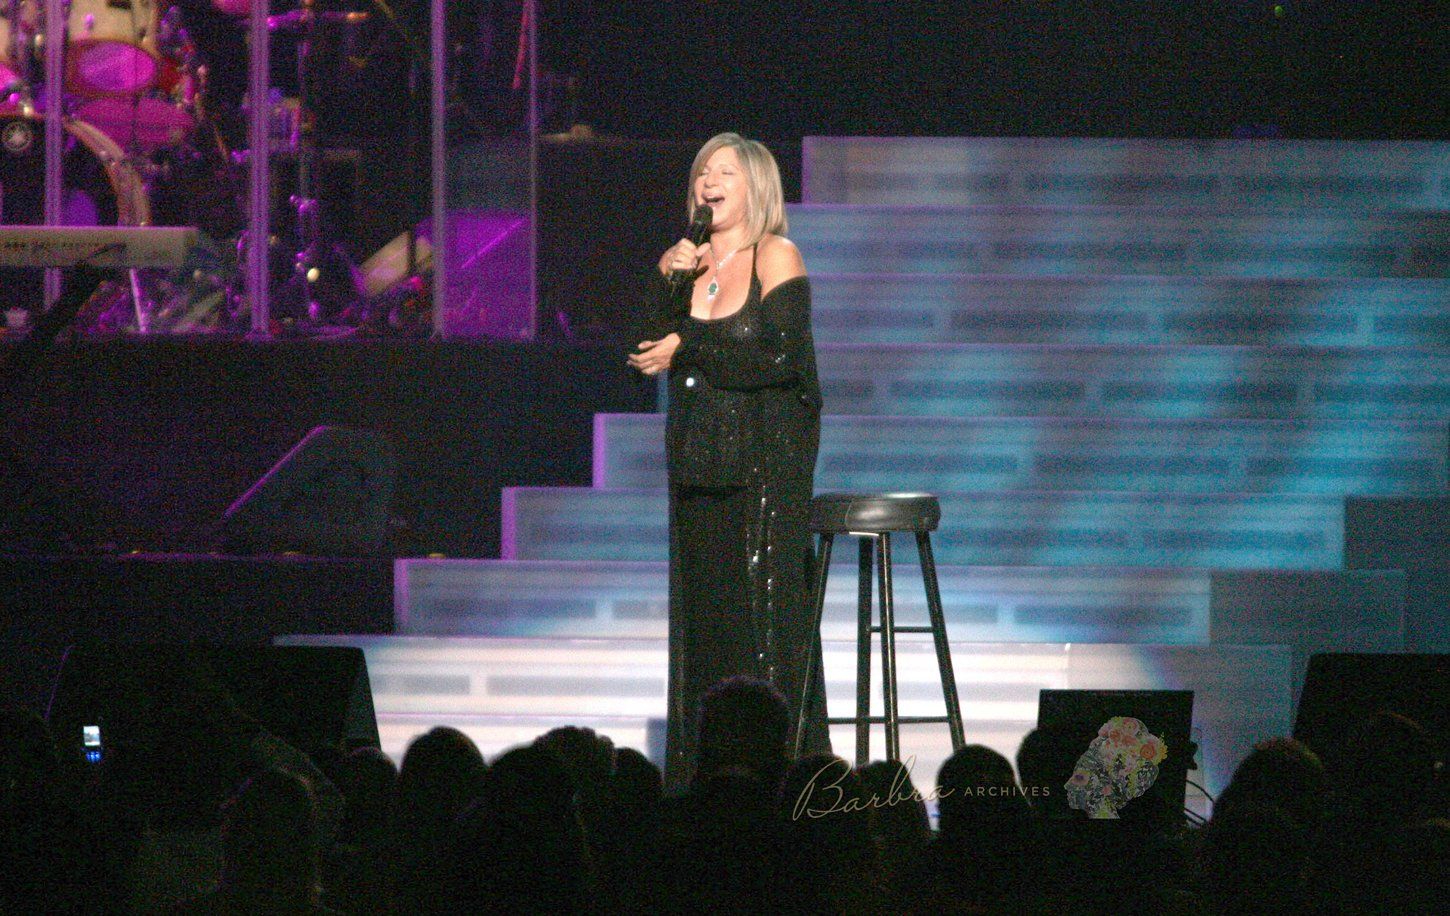 Barbra Streisand appears at the Andre Agassi Charitable Foundation in Las Vegas. Photo: Roger Williams